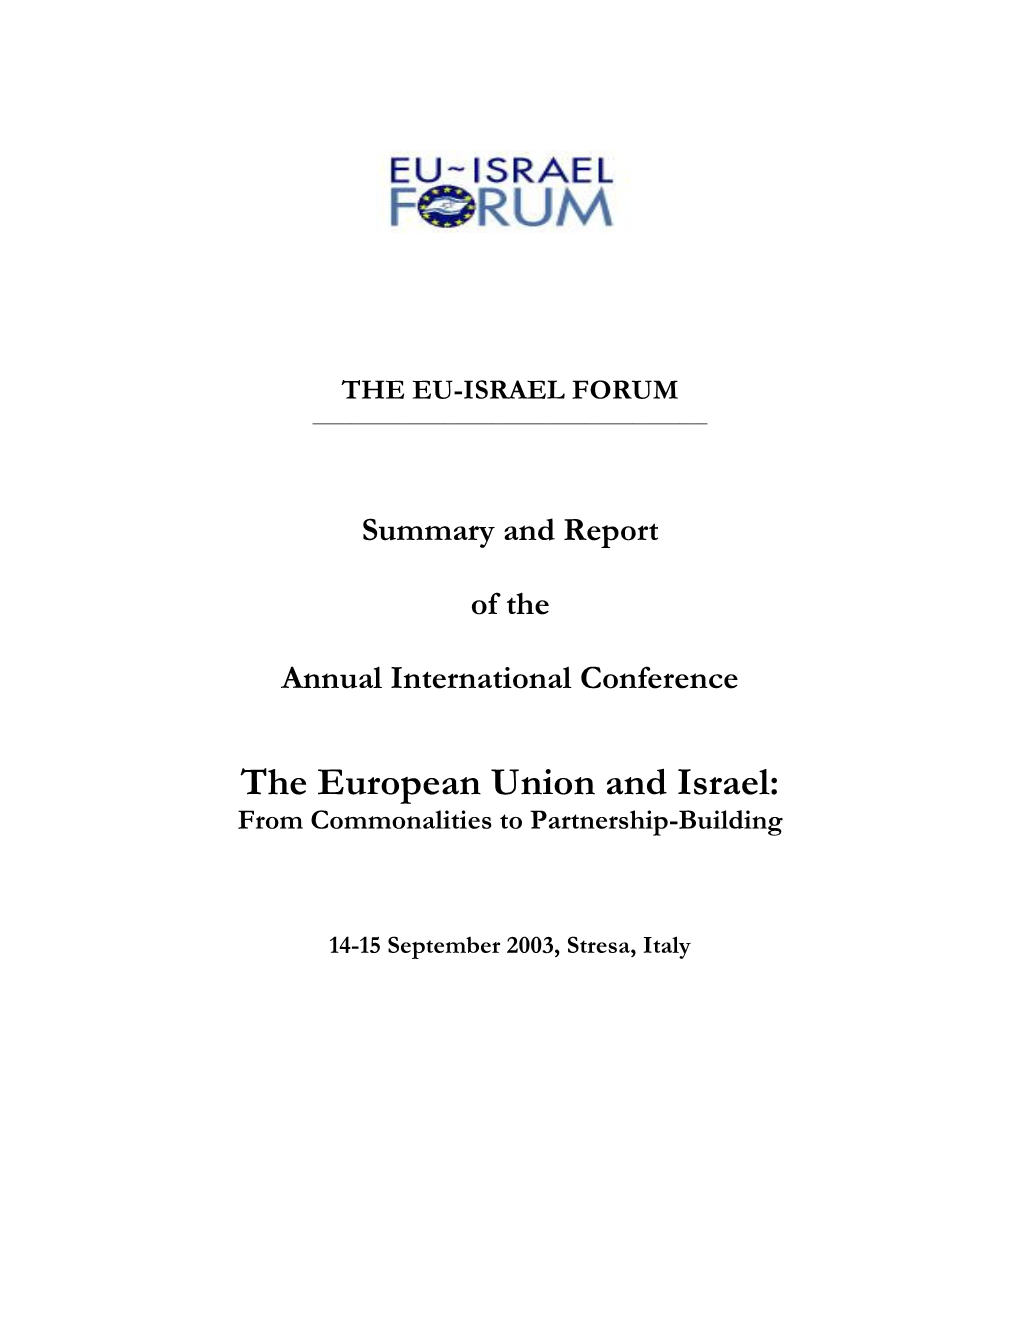 The European Union and Israel: from Commonalities to Partnership-Building